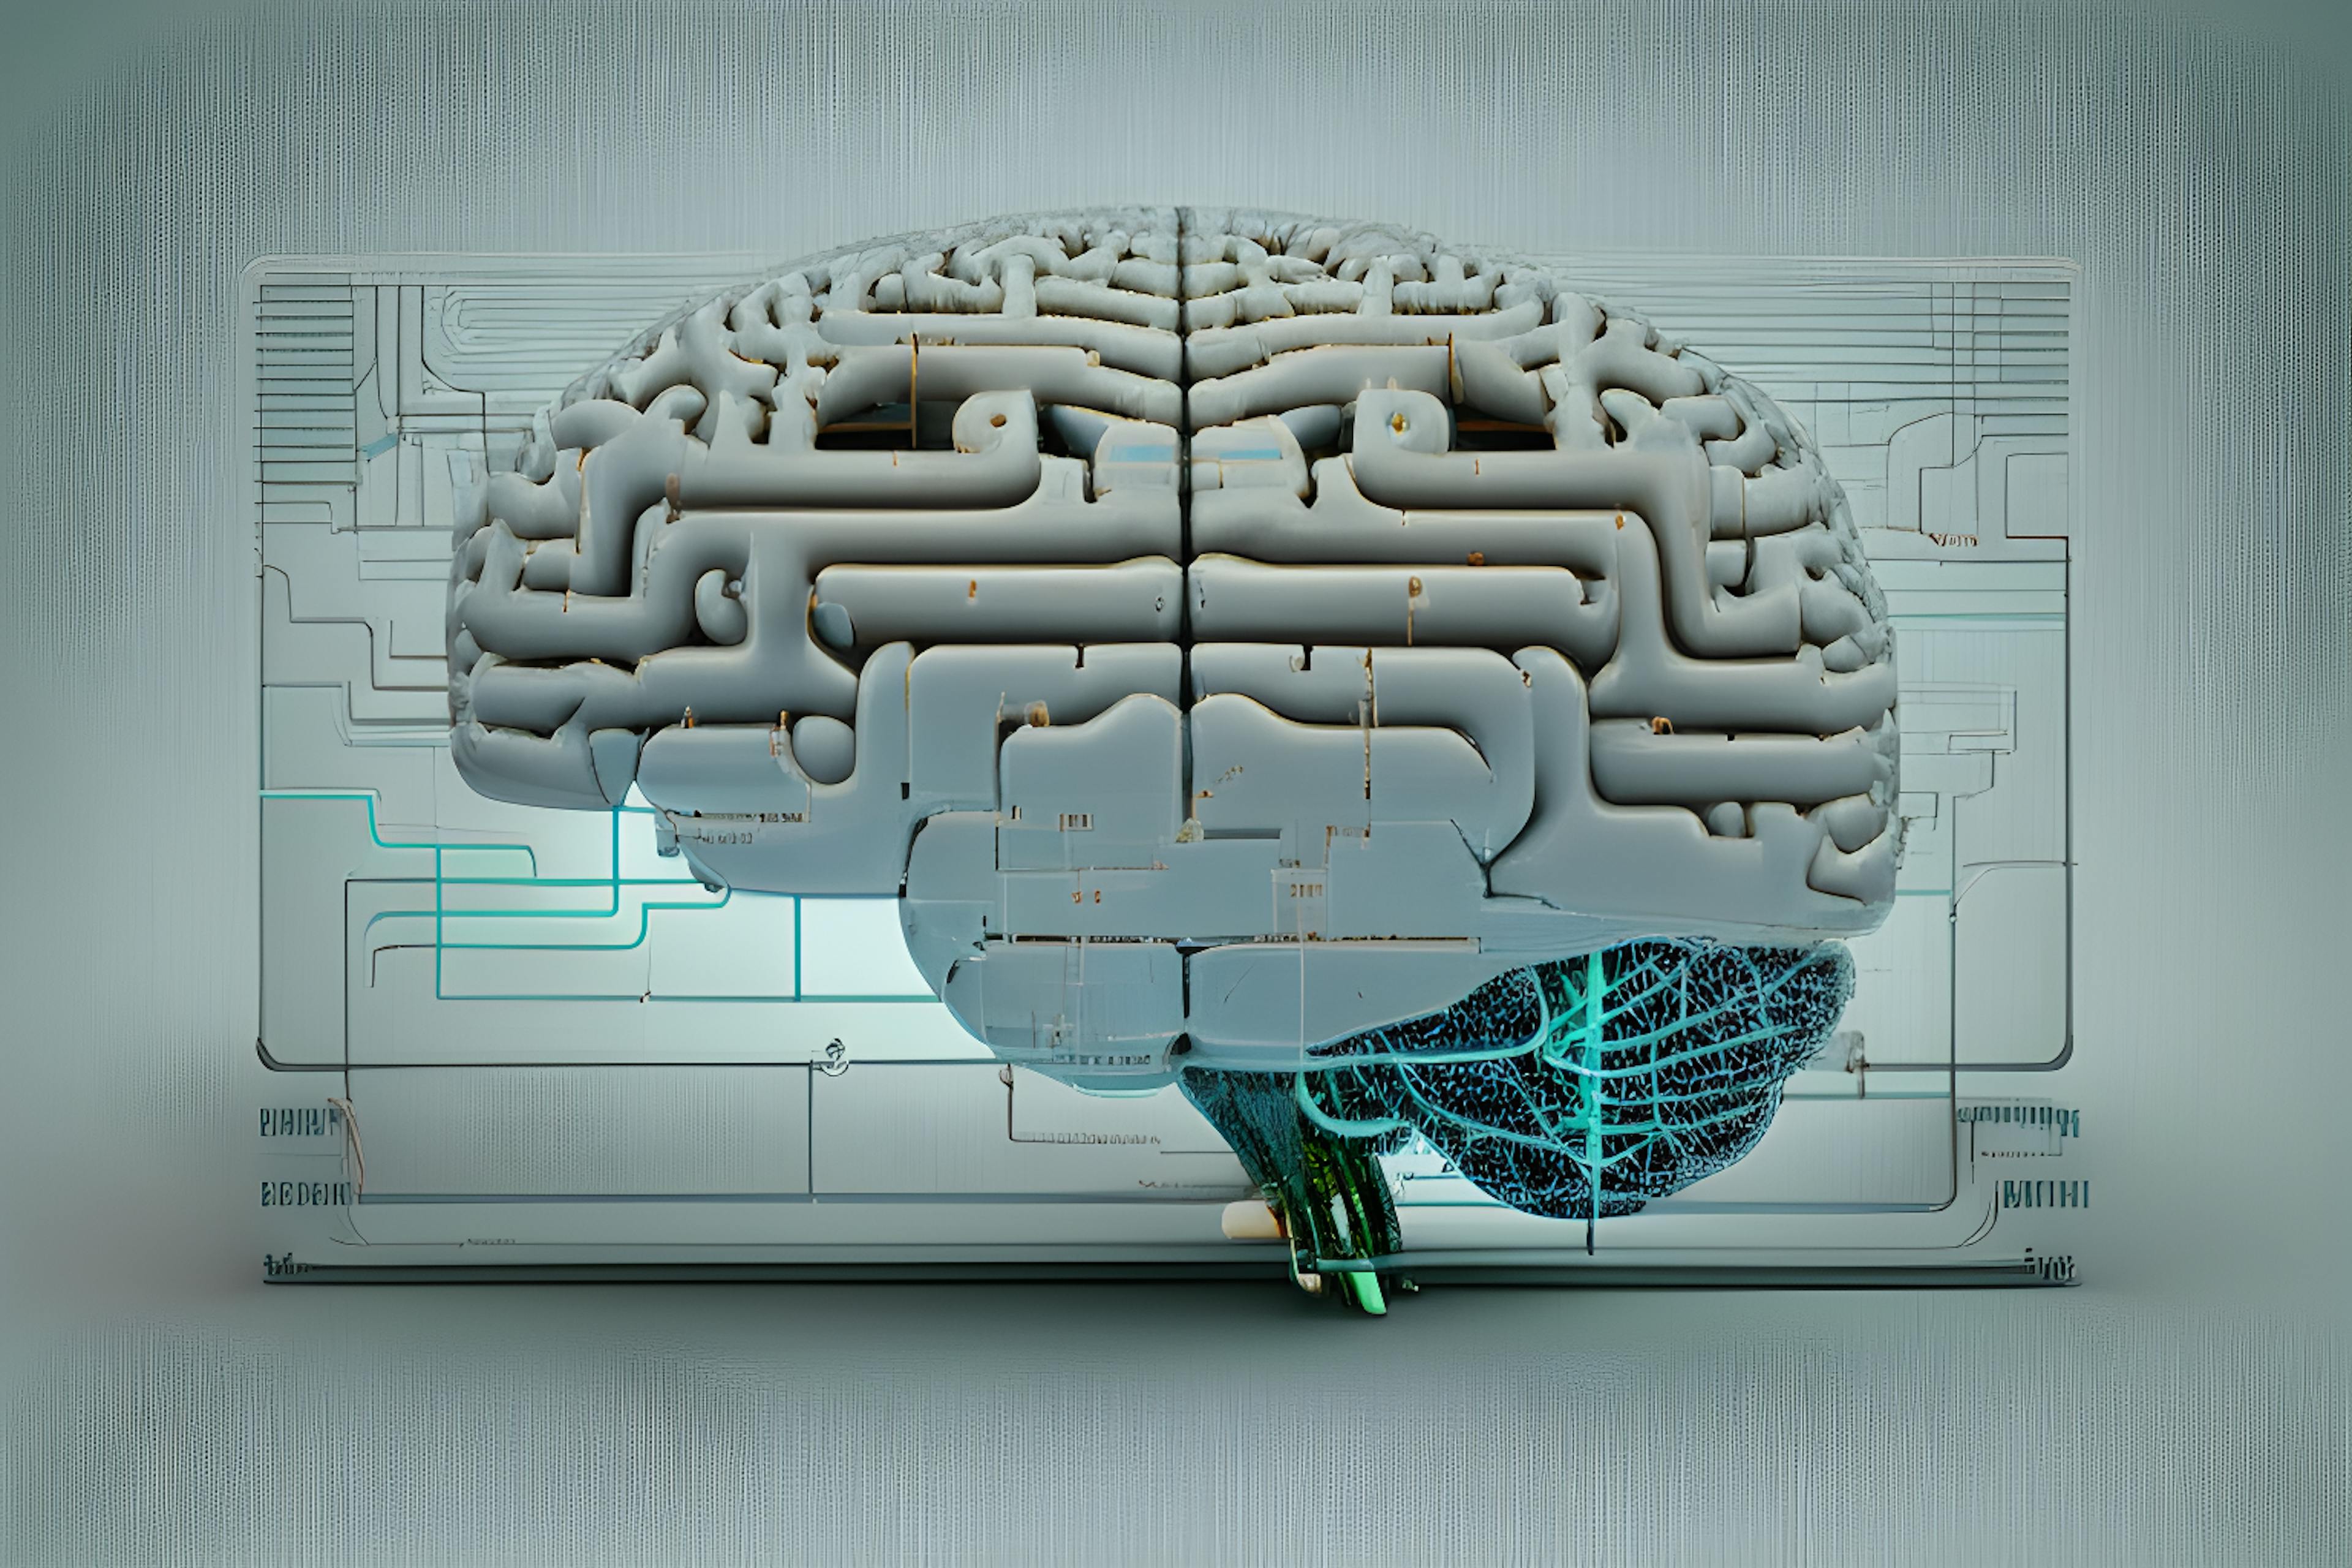 featured image - Neuralink Takes on Human Brains: 28% of Users Express Ethical Concerns